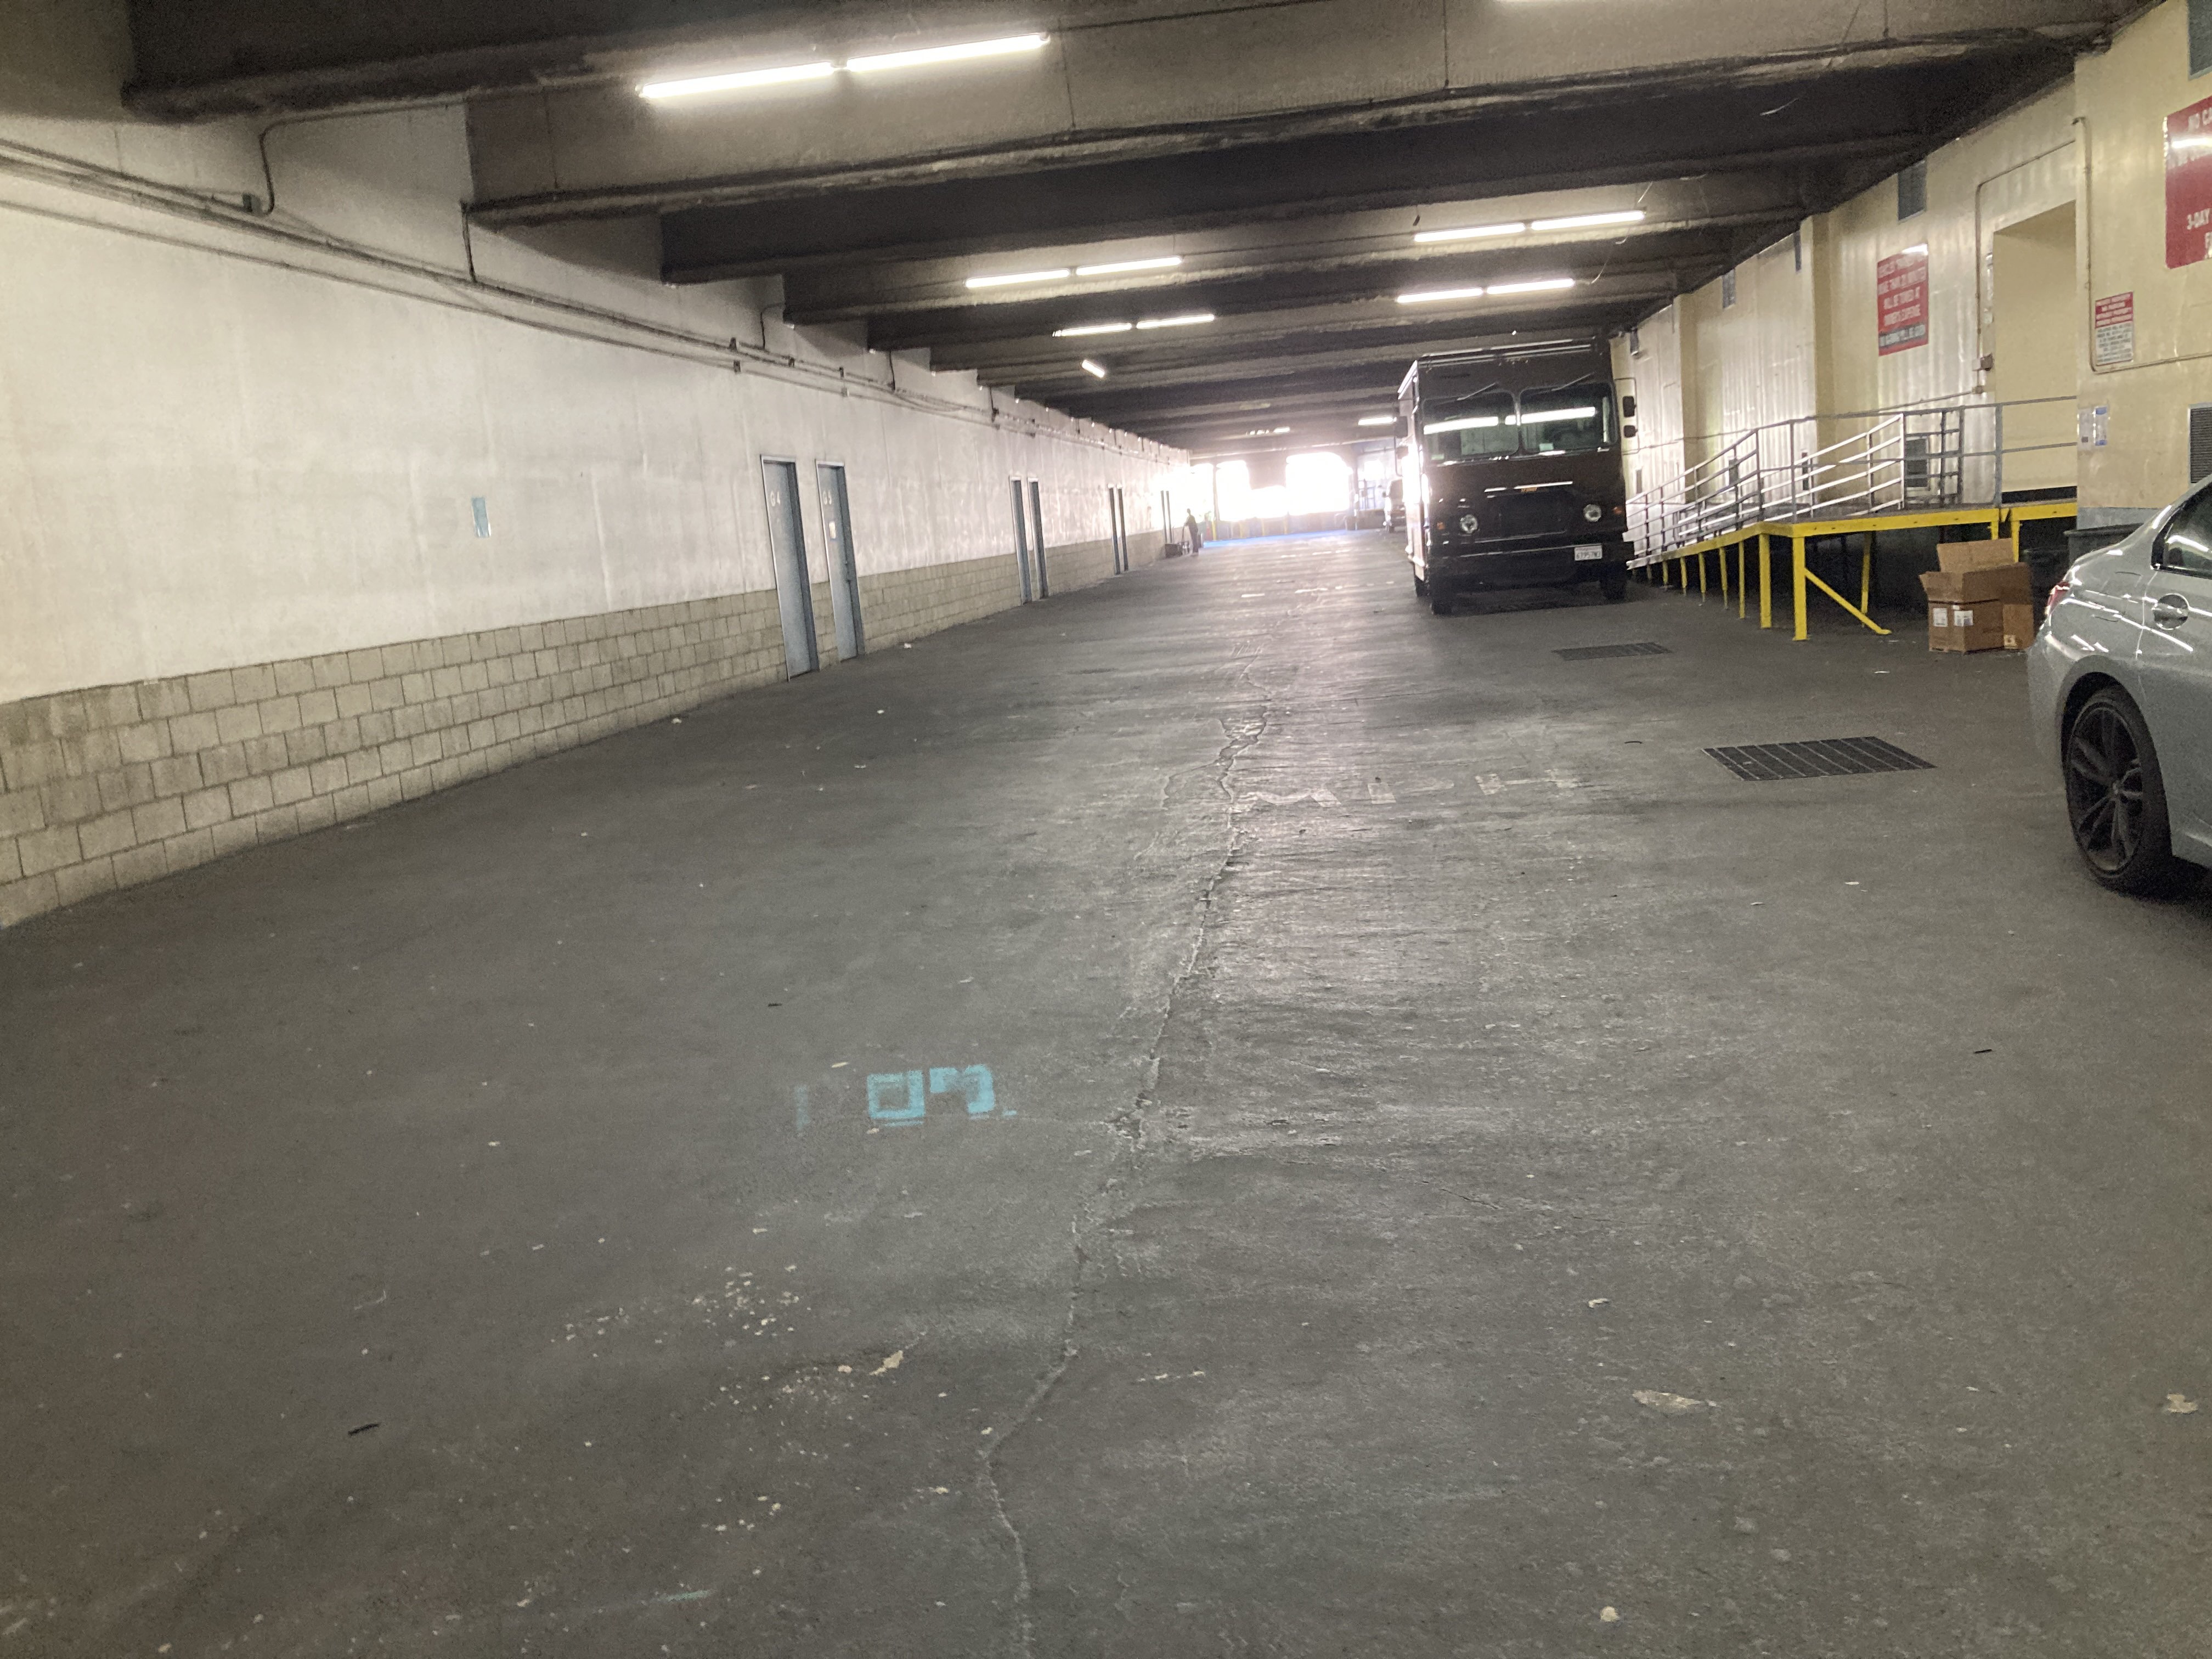 Looking along the upper floor vehicle hallway. A step van is parked next to a ramp leading up to a loading dock.